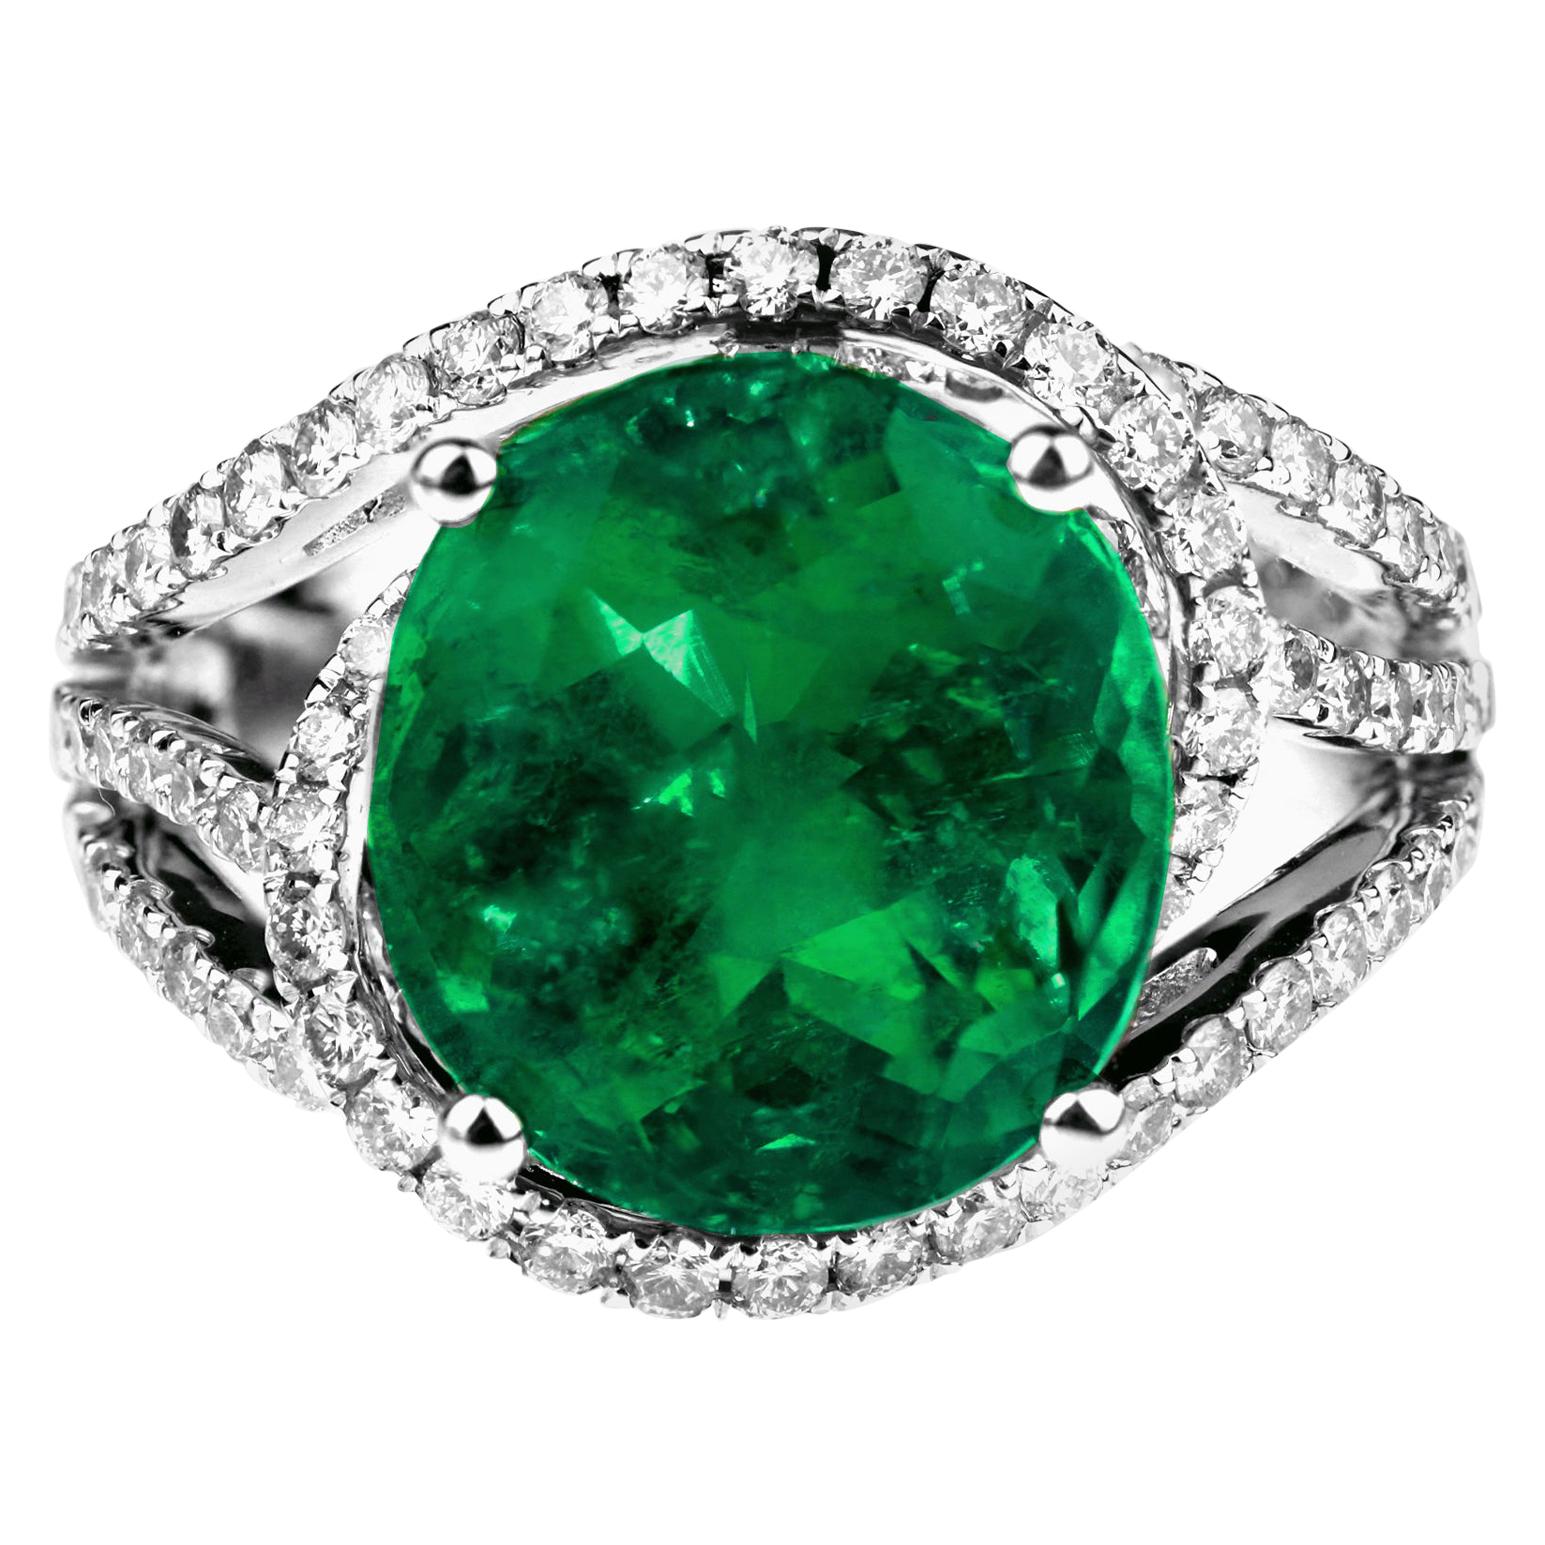 Certified Natural Colombian Emerald 5.3 ct and Diamond Ring in 18K White Gold